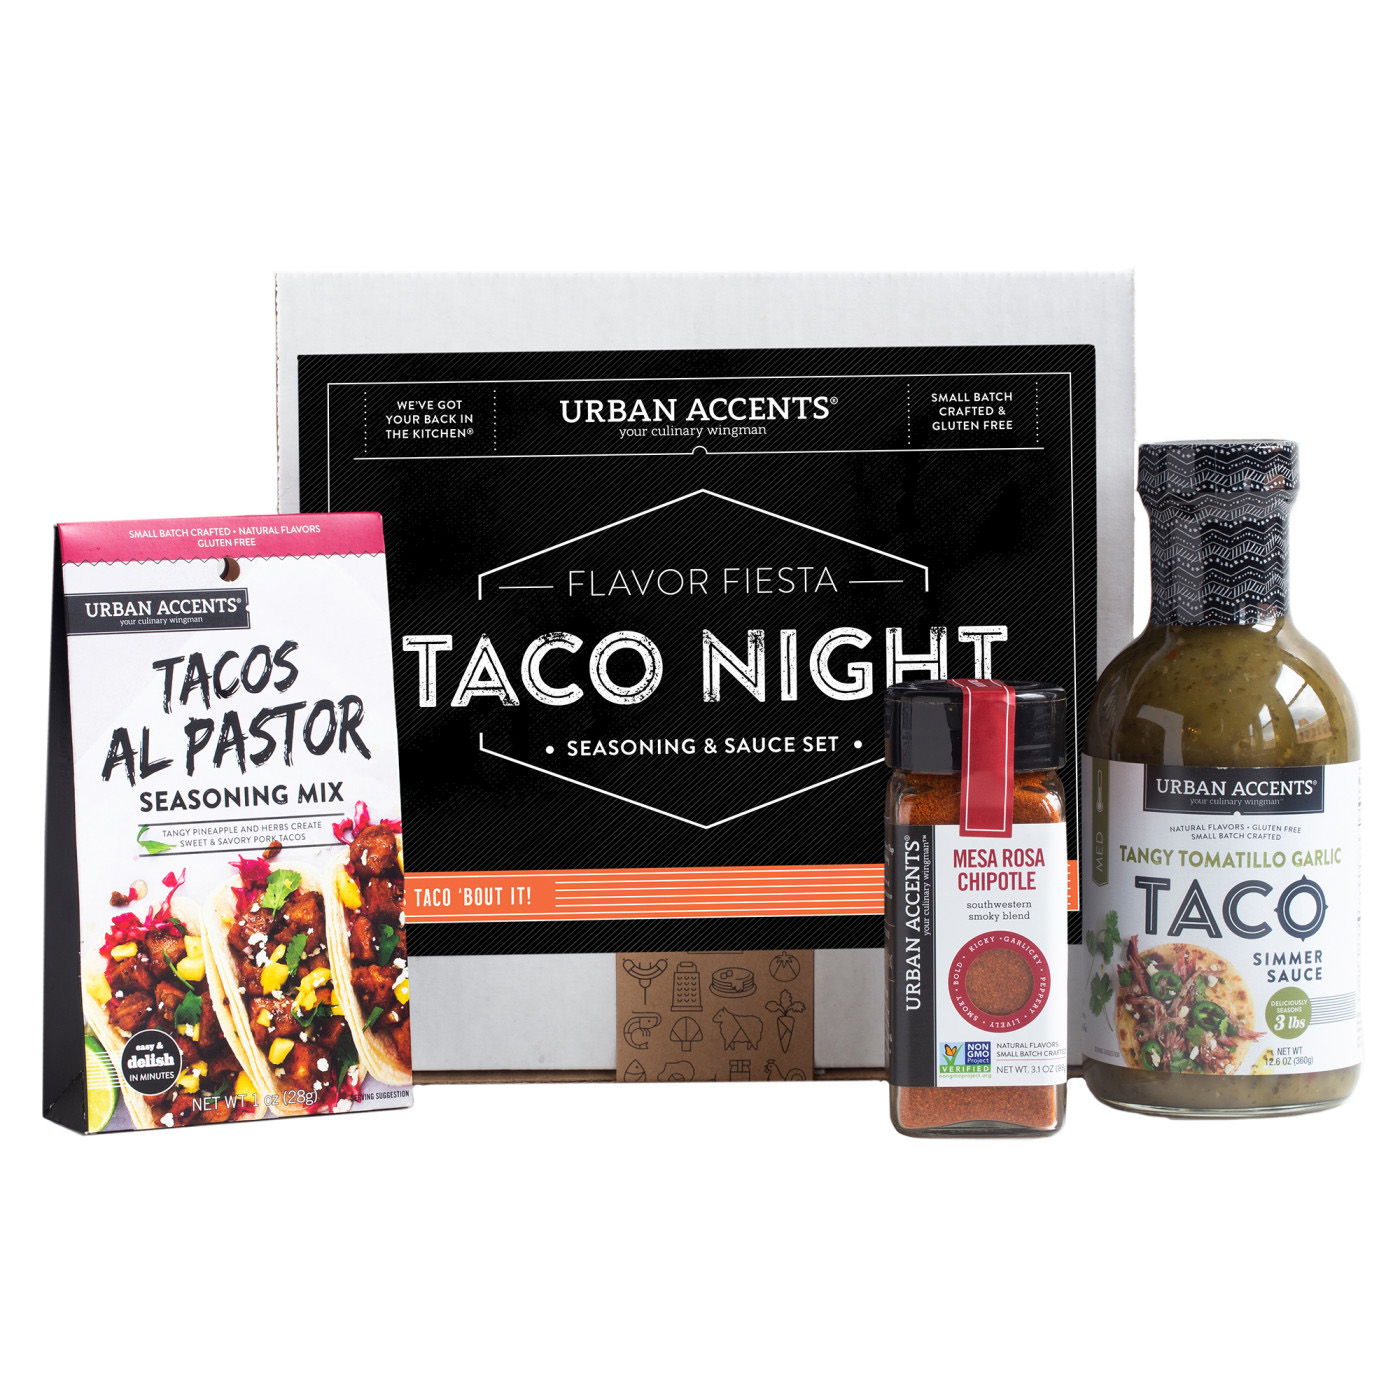 Family Taco Night Gift Set with Custom Tote | Reusable